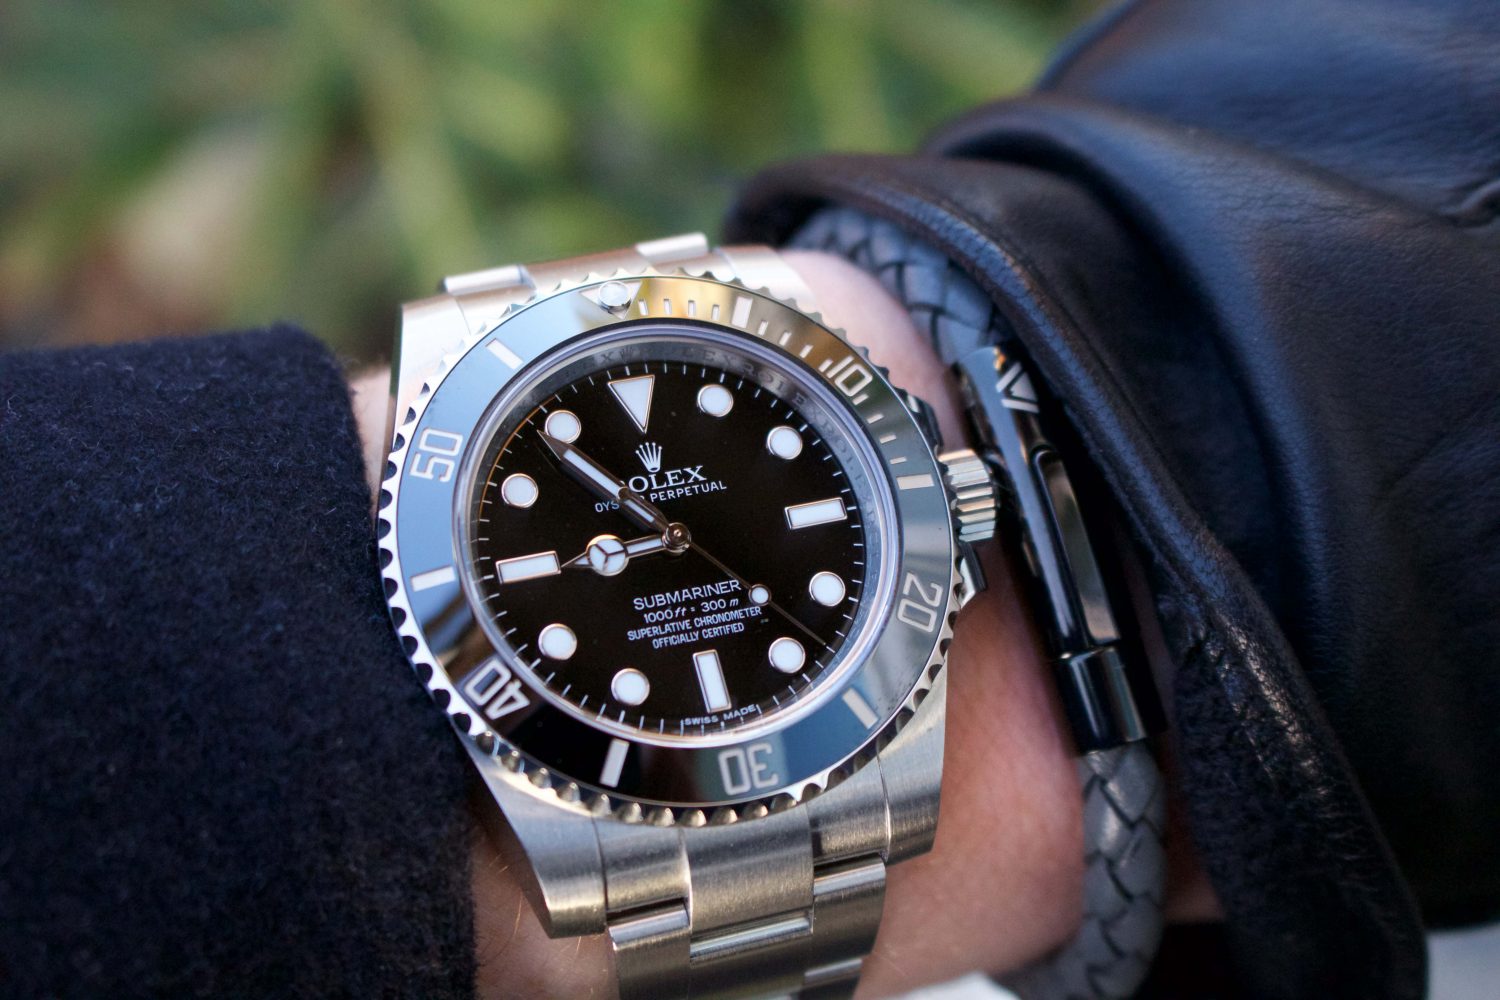 Rolex Submariner Date or No Date? Which 